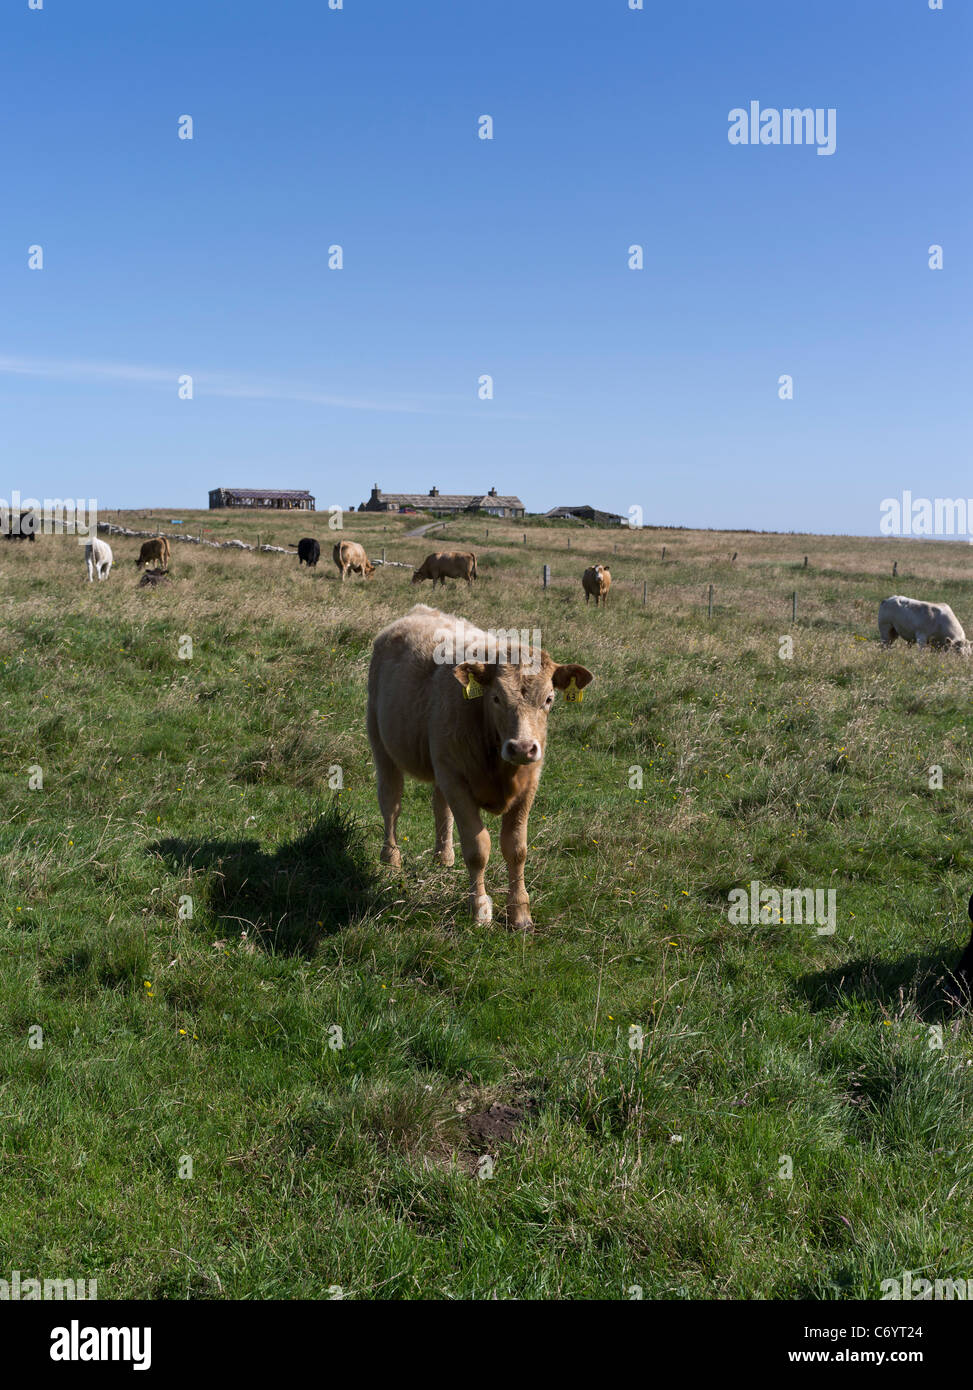 dh Hundland PAPA WESTRAY ORKNEY Scottish Beef cow in field of cows cottage northern isles scotland calf livestock Stock Photo